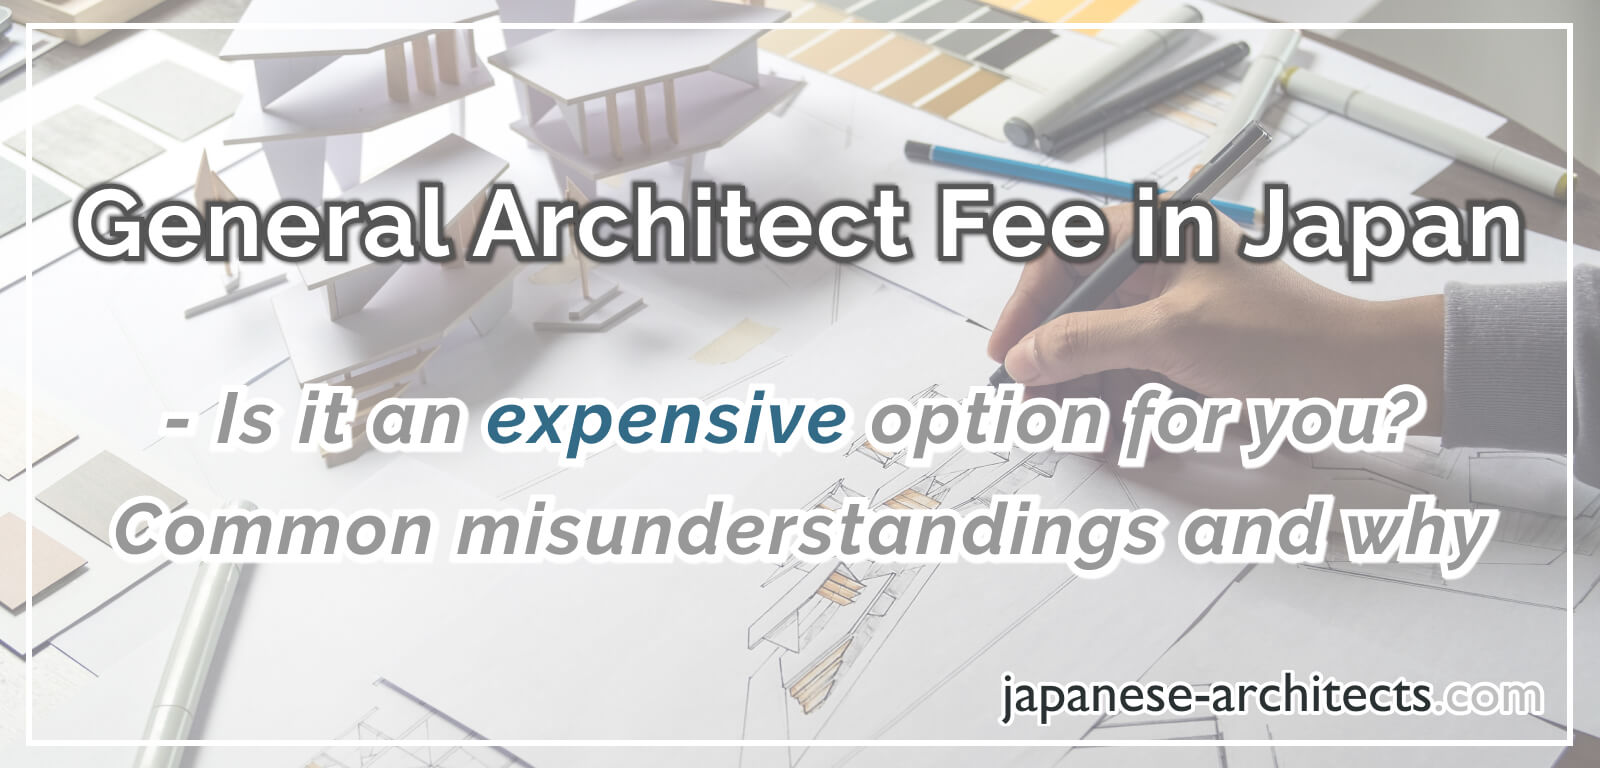 Is architect an expensive option for you? Common misunderstandings and why